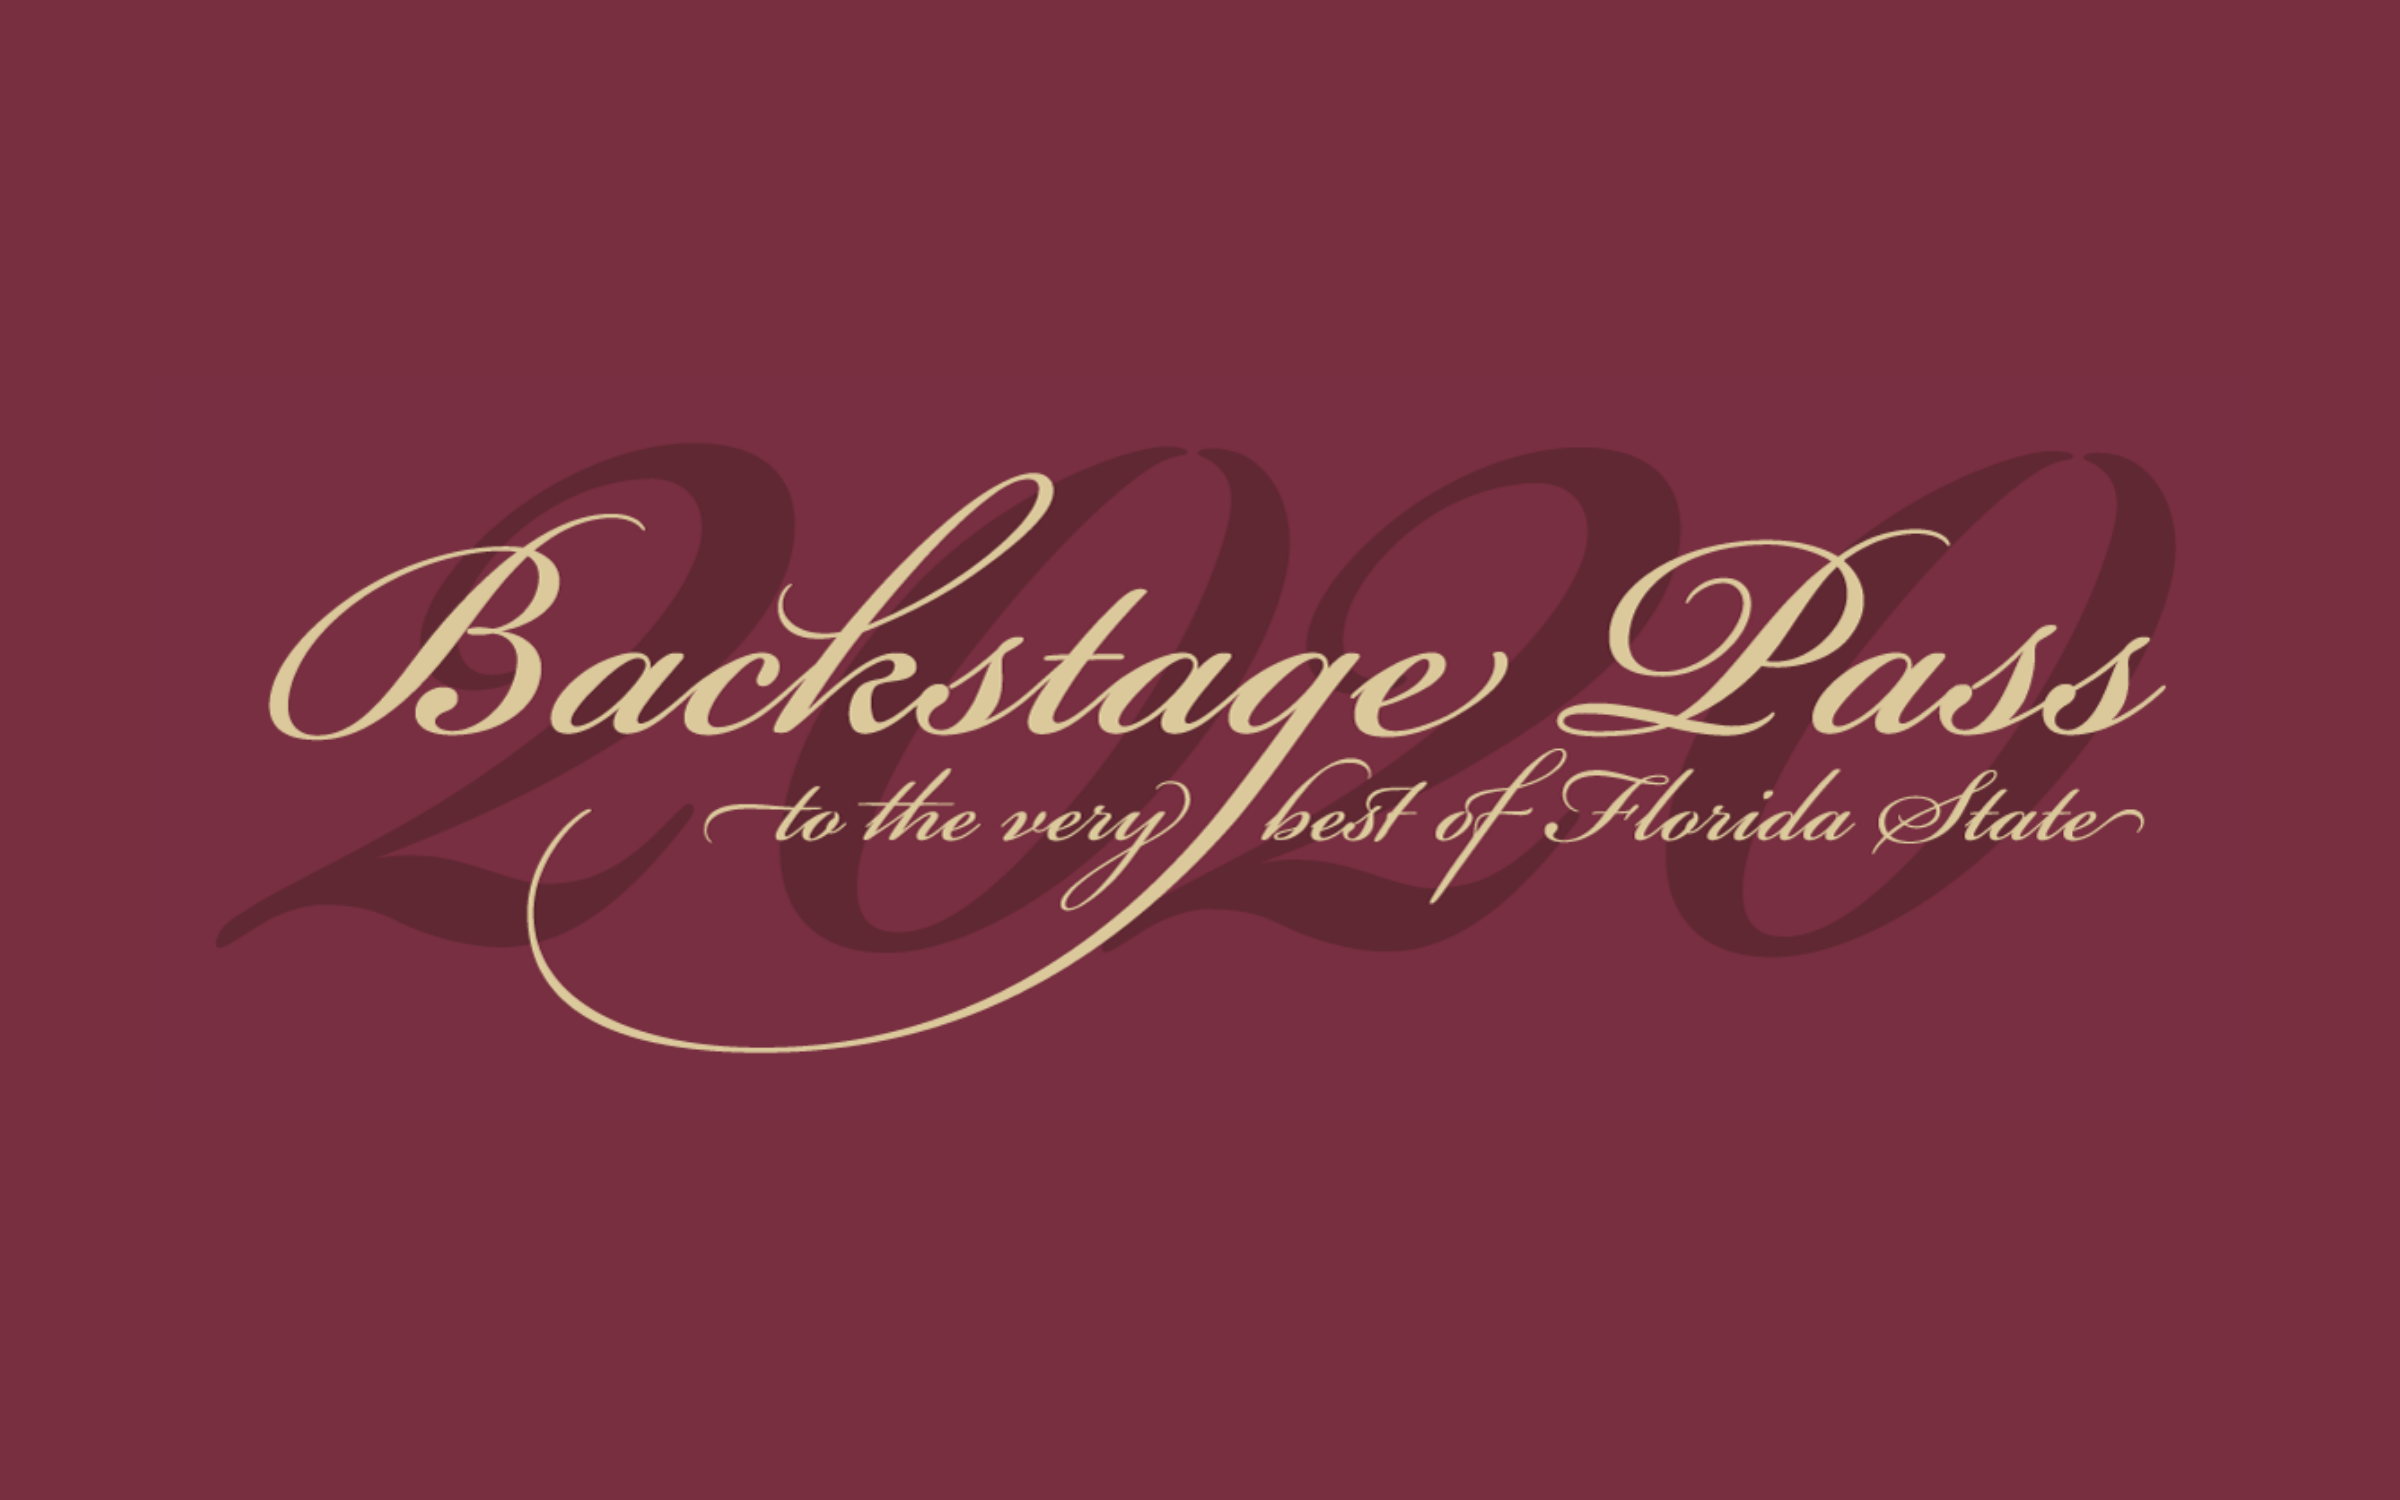 Gold script text reading "Backstage Pass, to the very best of Florida State 2020" on a garnet background